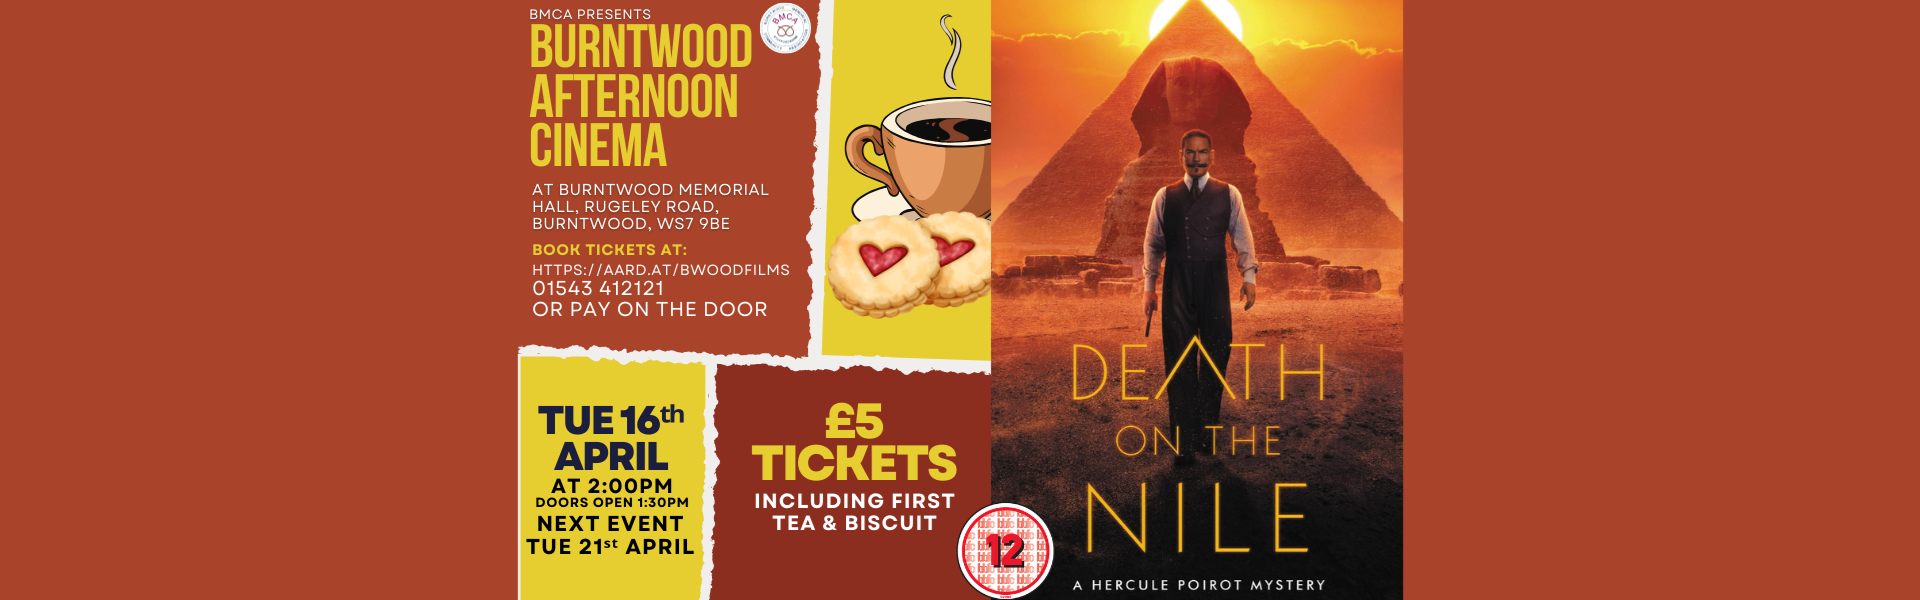 Burntwood Afternoon Cinema - Death on the Nile